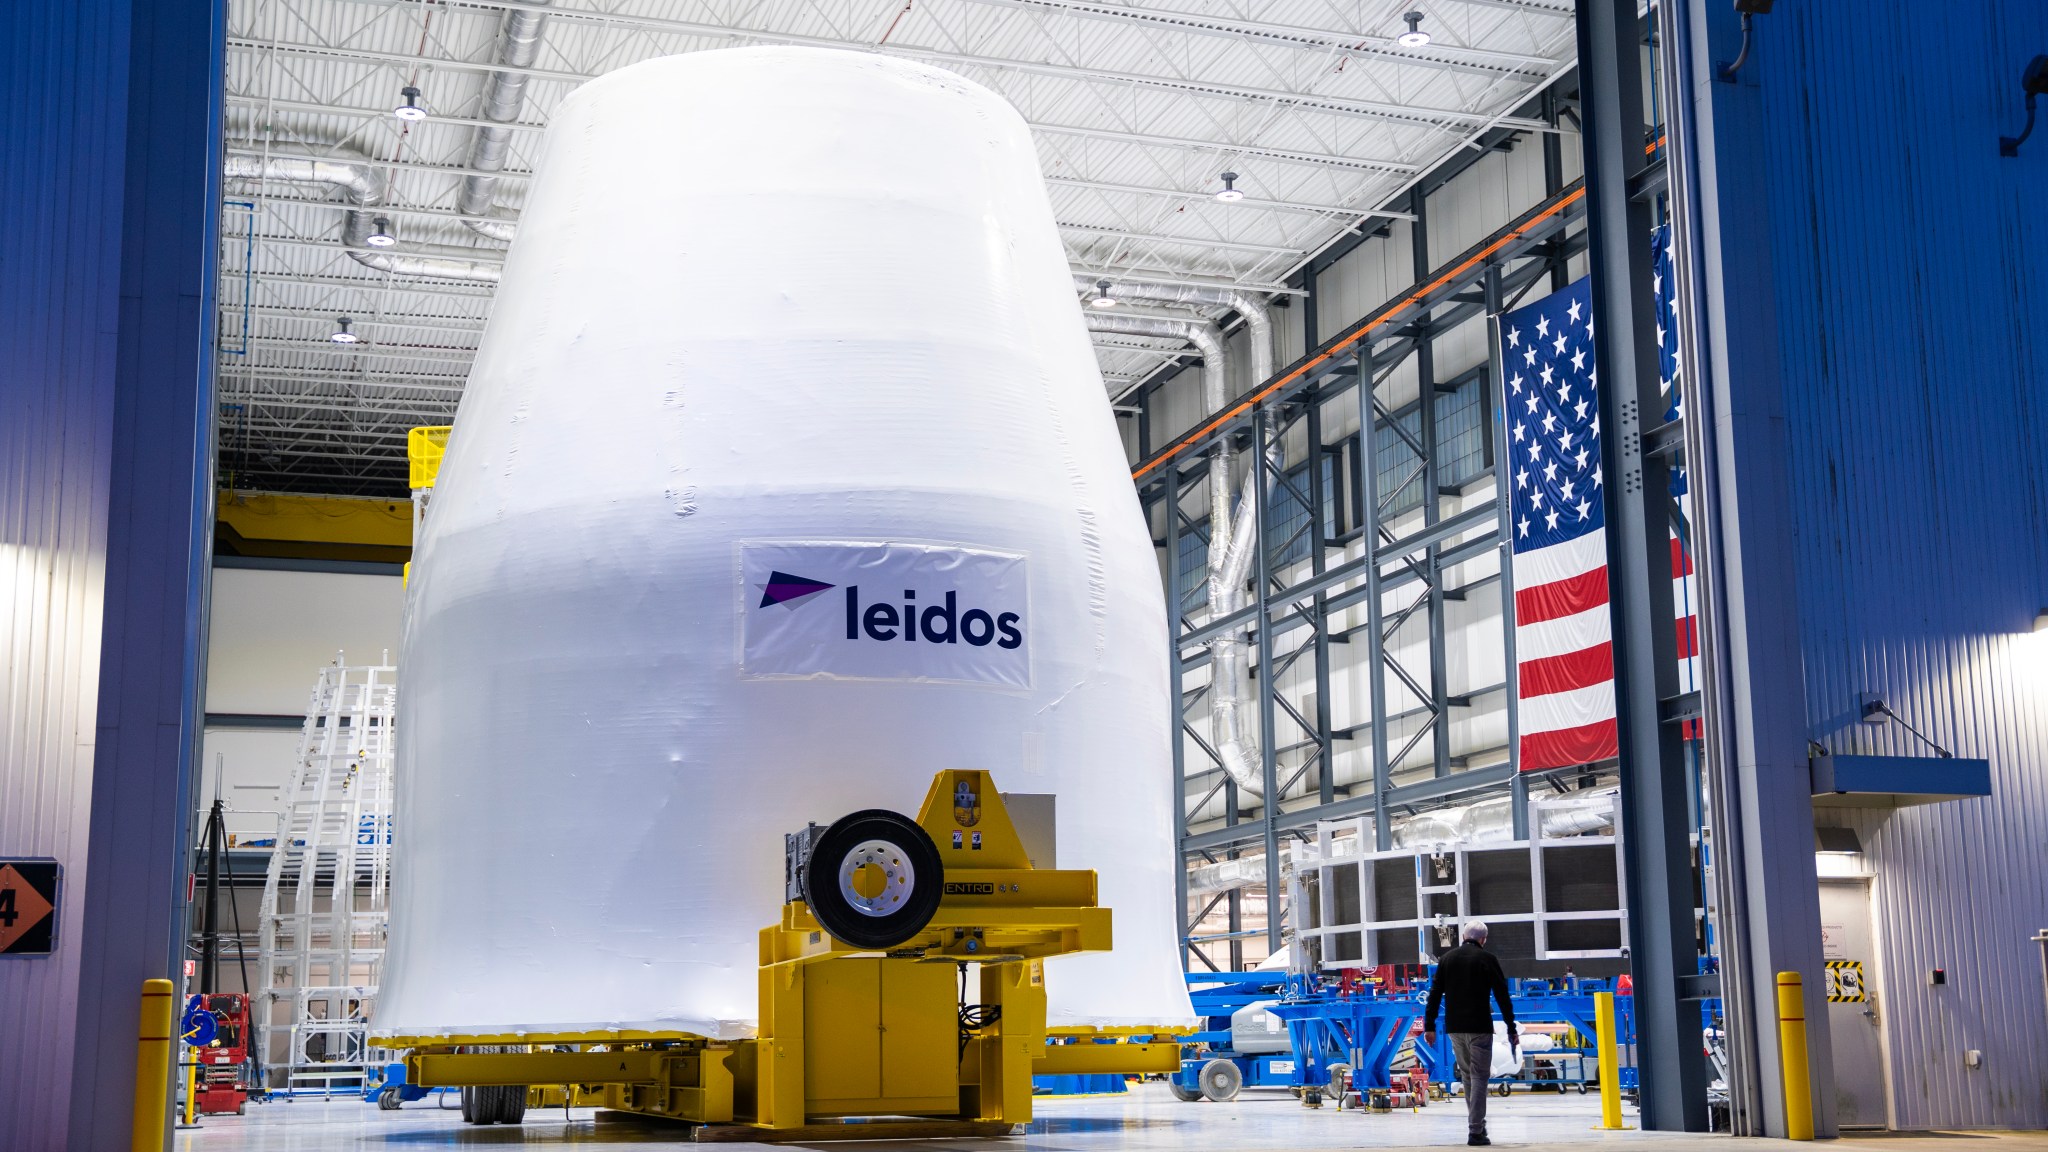 A test version of the universal stage adapter for the SLS (Space Launch System) rocket for Artemis 4 is seen inside Marshall Space Flight Center’s facility in Huntsville, Alabama. The adapter sits on a yellow piece of hardware. There is an American flag hanging on the wall to the right and the word “Leidos” is painted black on the white adapter.